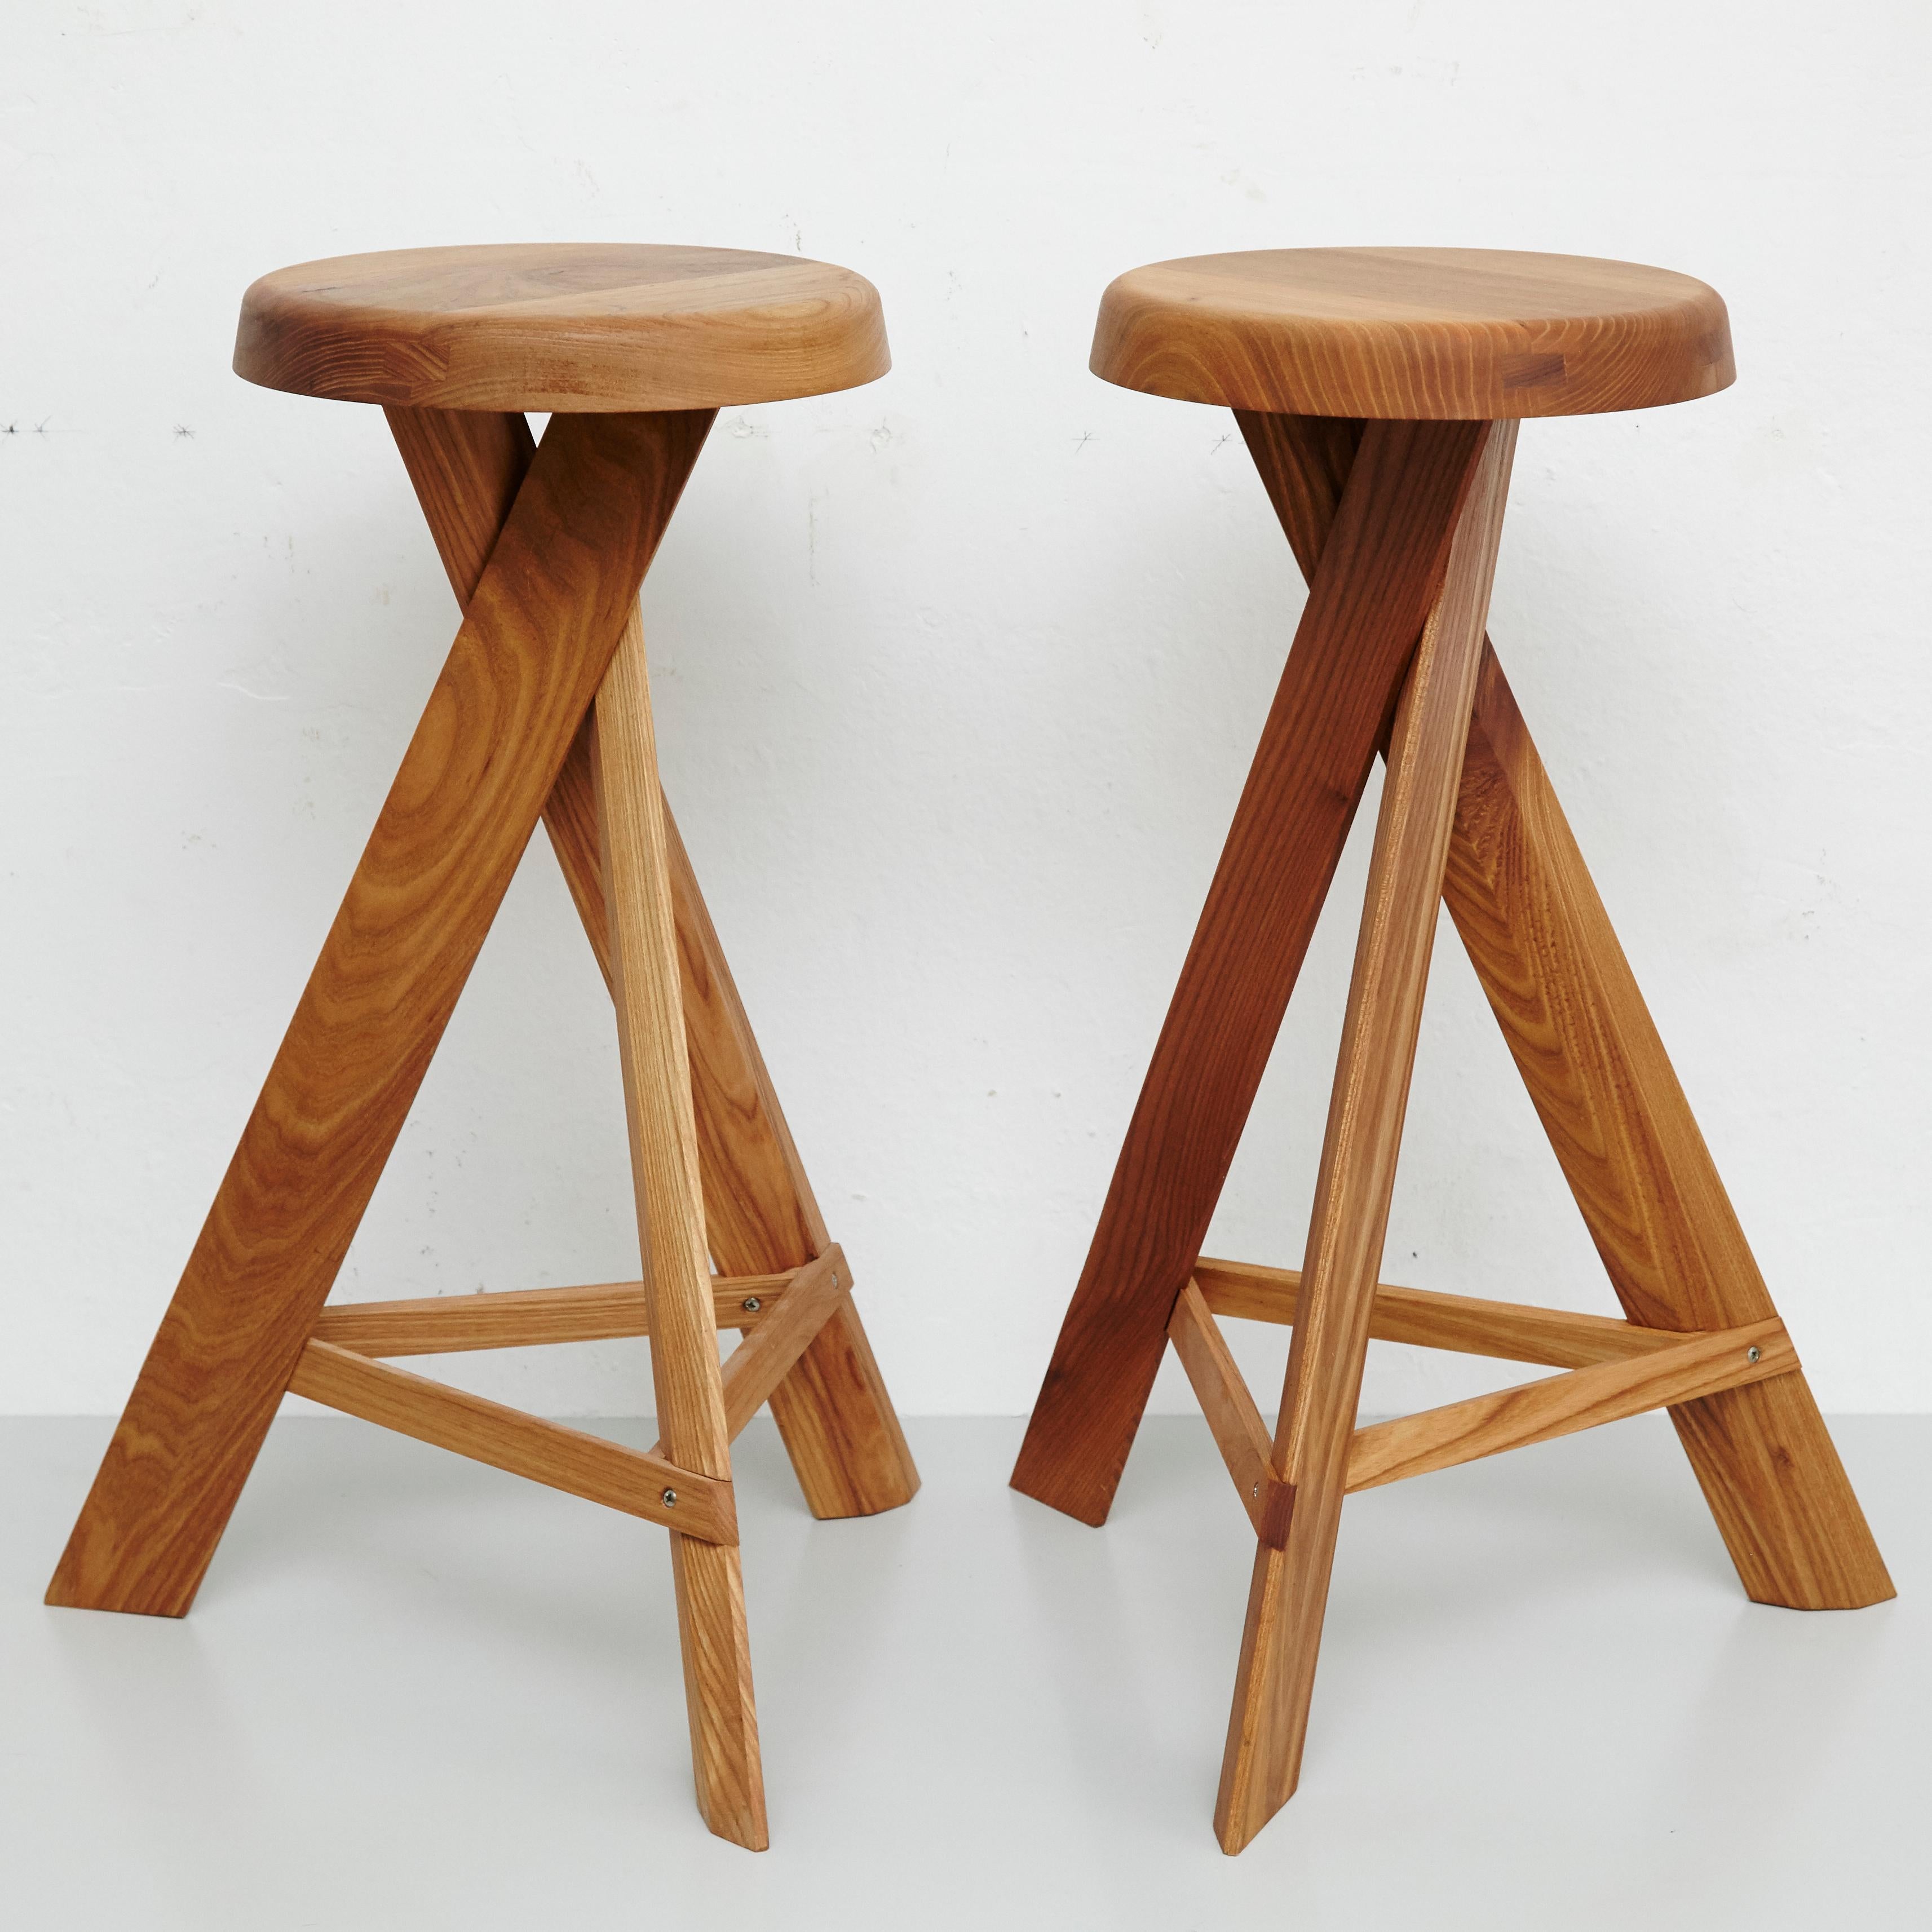 Pair of S 31 C stools designed by Pierre Chapo, circa 1960.
Manufactured by Pierre Chapo in France, 2020.
Solid elmwood.

In good original condition, with minor wear consistent with age and use, preserving a beautiful patina.

Pierre Chapo is